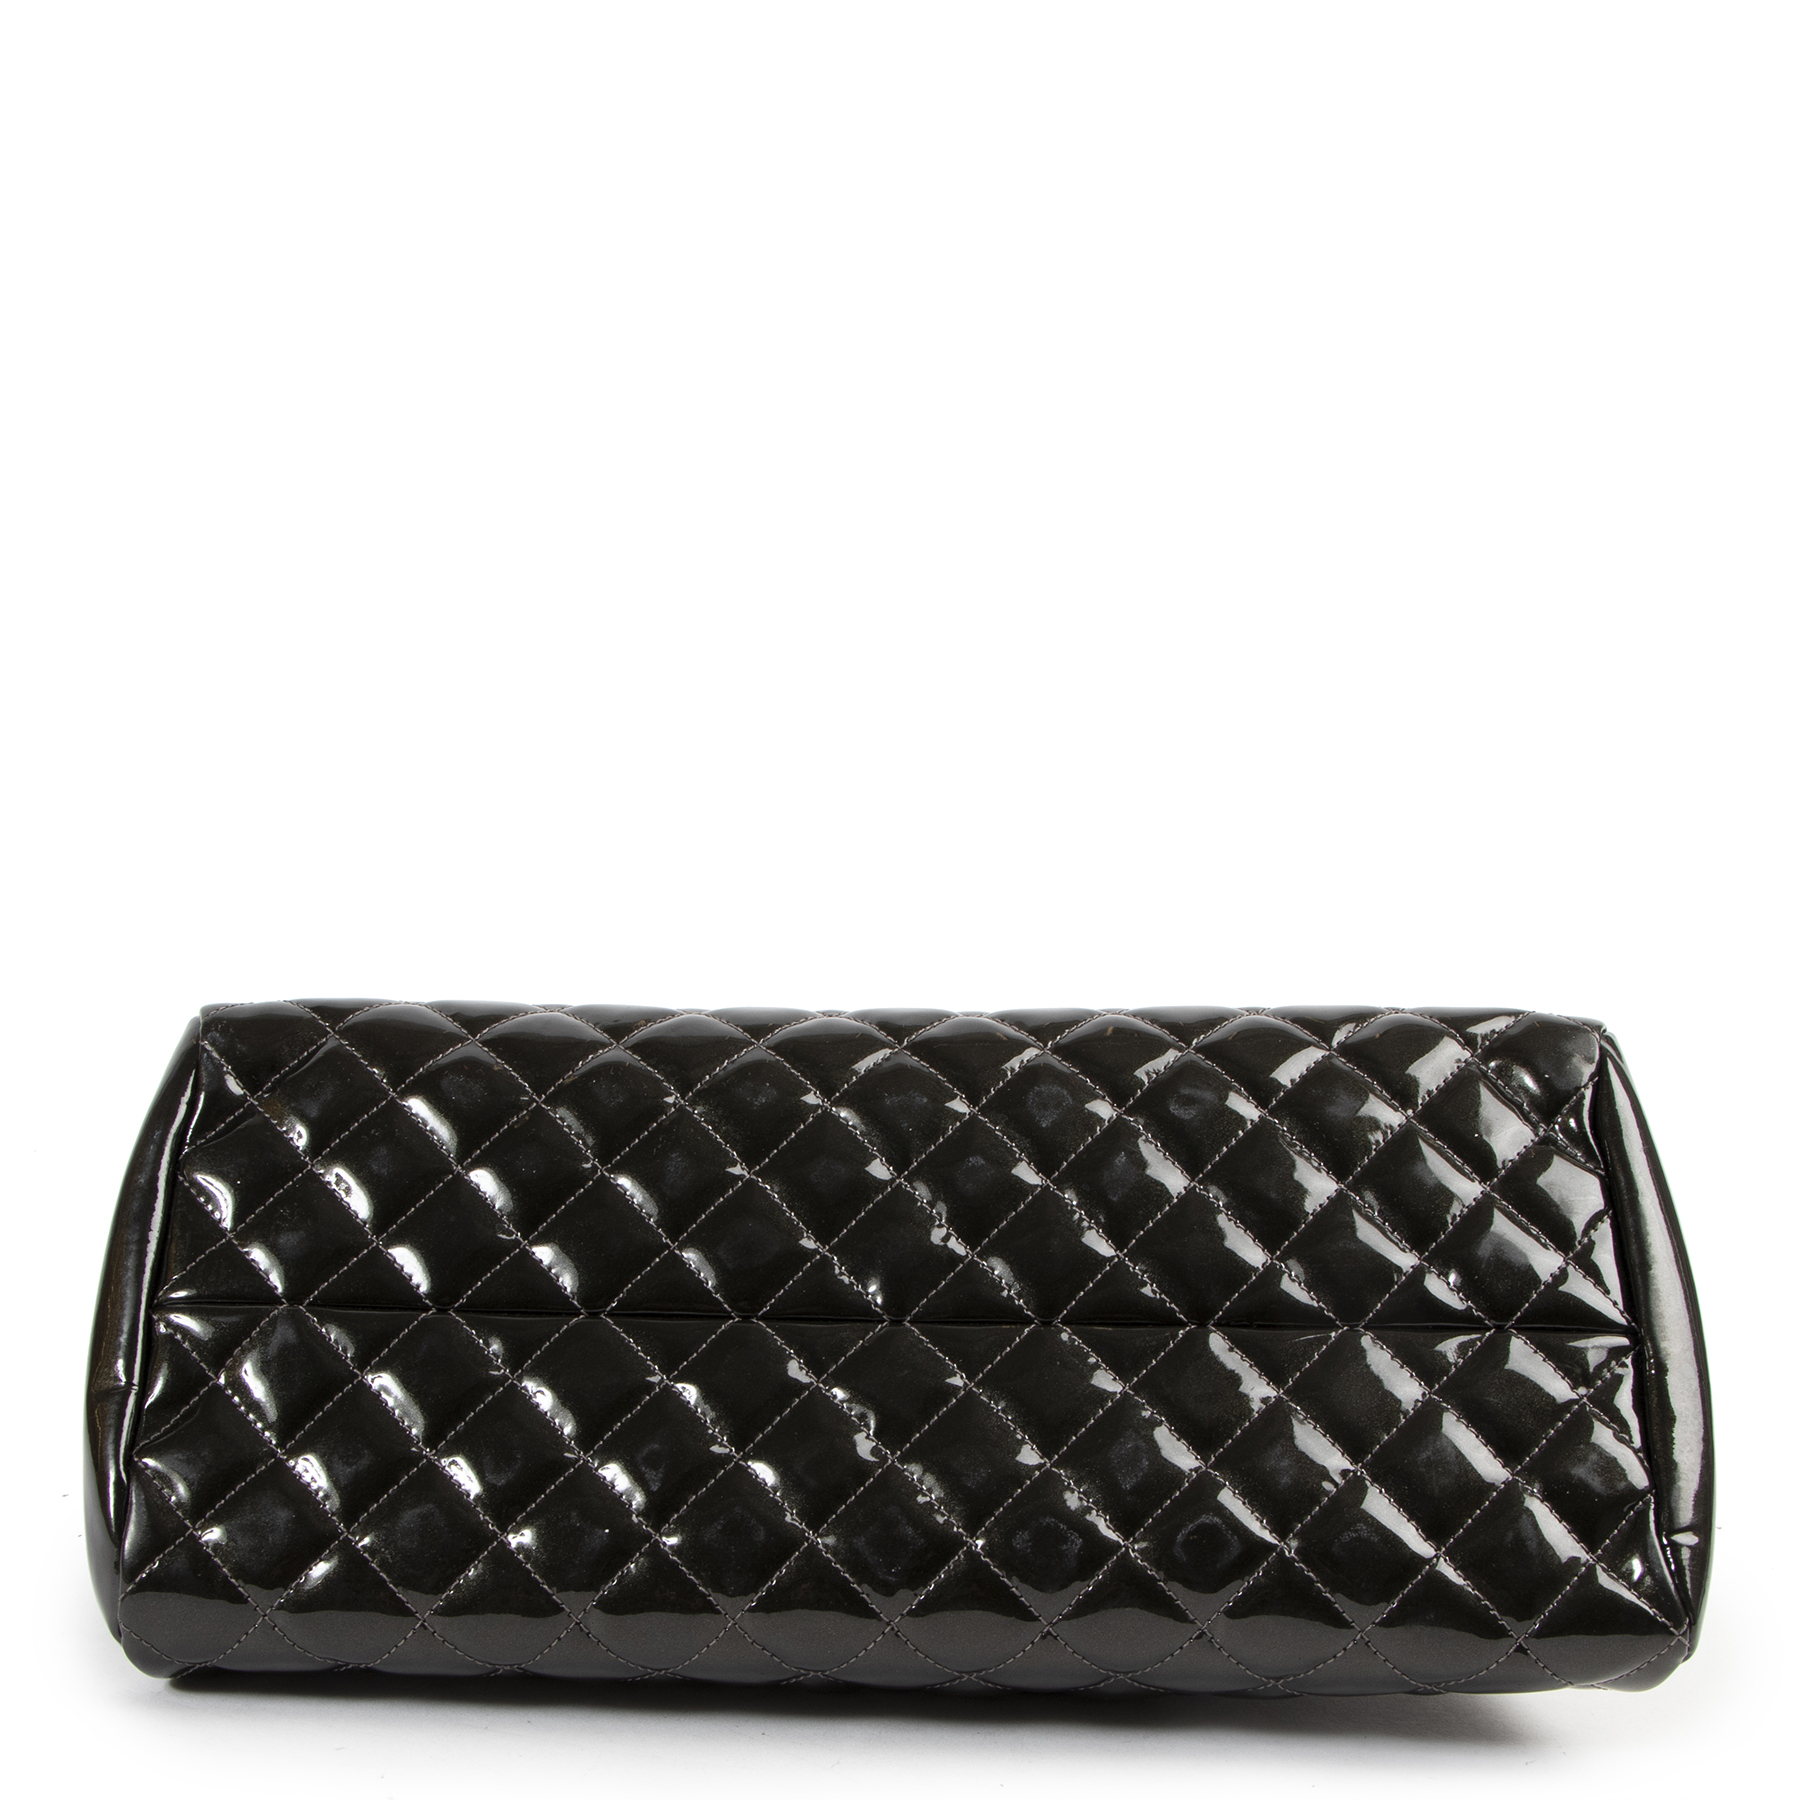 Chanel Gold Degrade Quilted Patent Leather Mademoiselle Bag